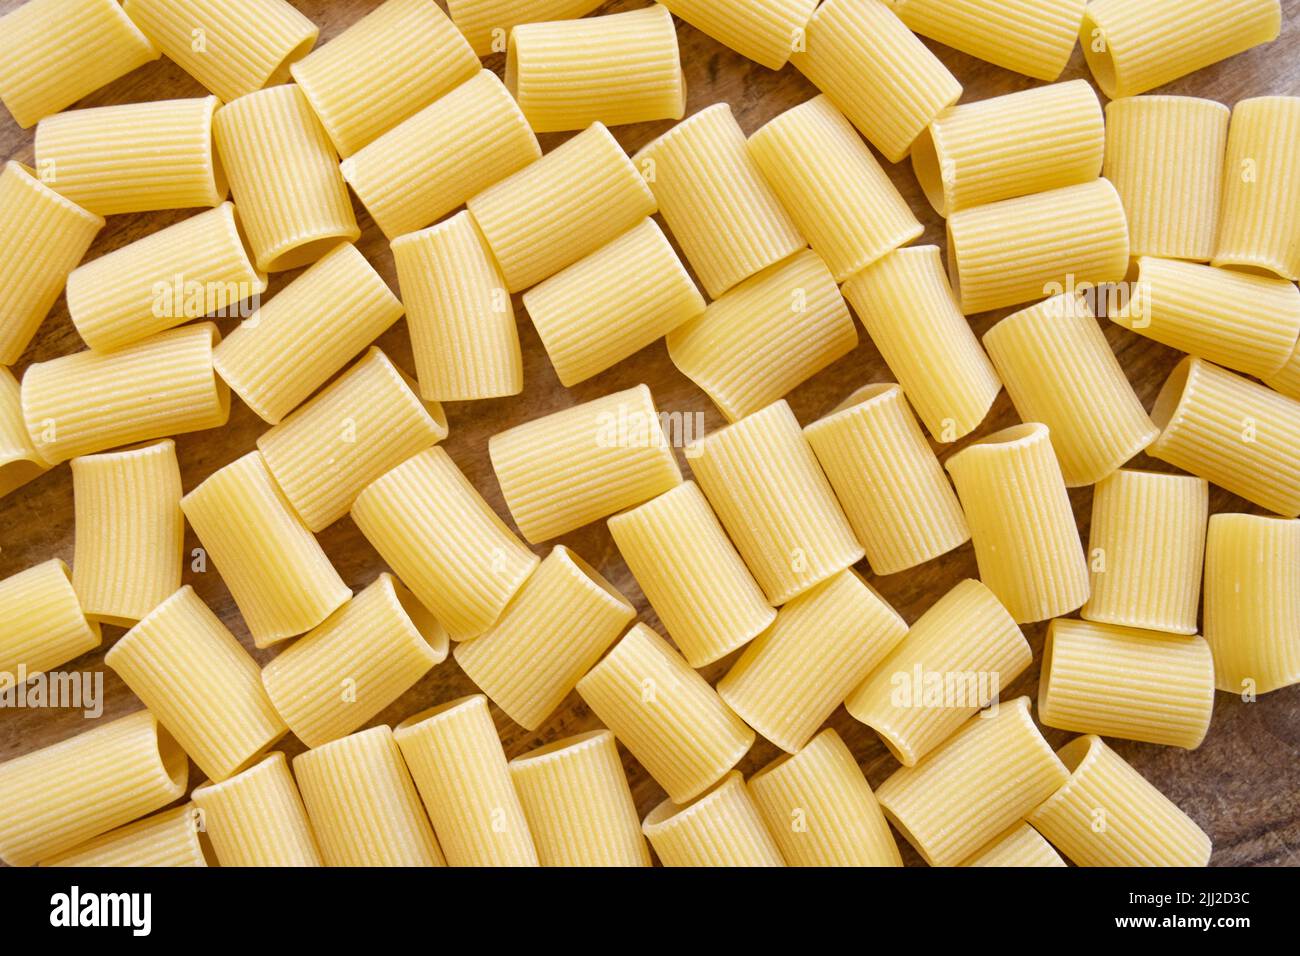 top view of rigatoni pasta on a wooden table Stock Photo